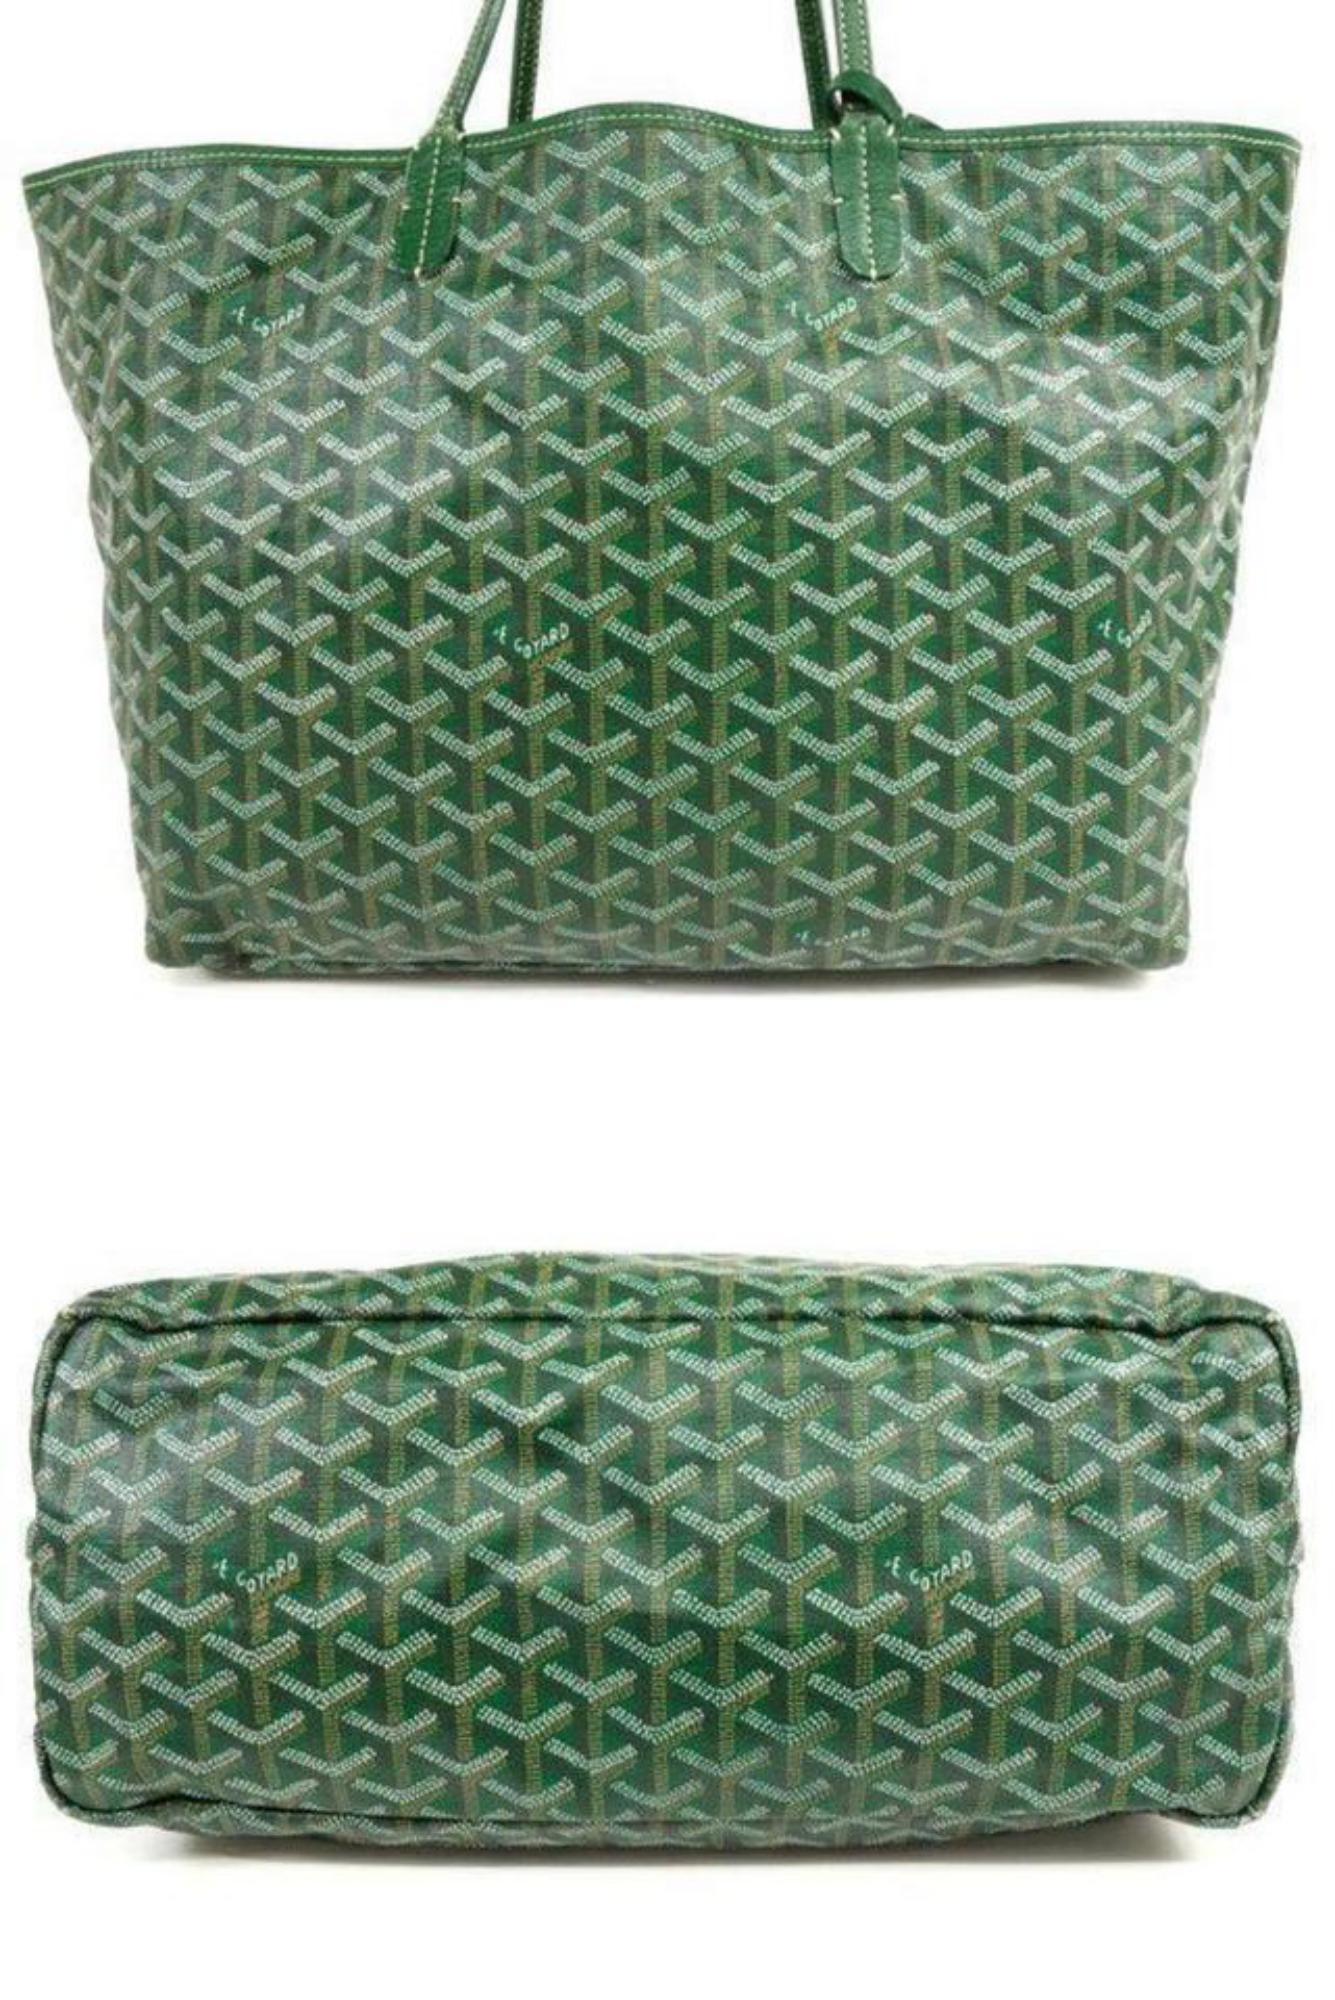 Goyard Limited Stars Chevron Goyardine St Louis with Pouch 233084 Green Tote In Good Condition For Sale In Forest Hills, NY